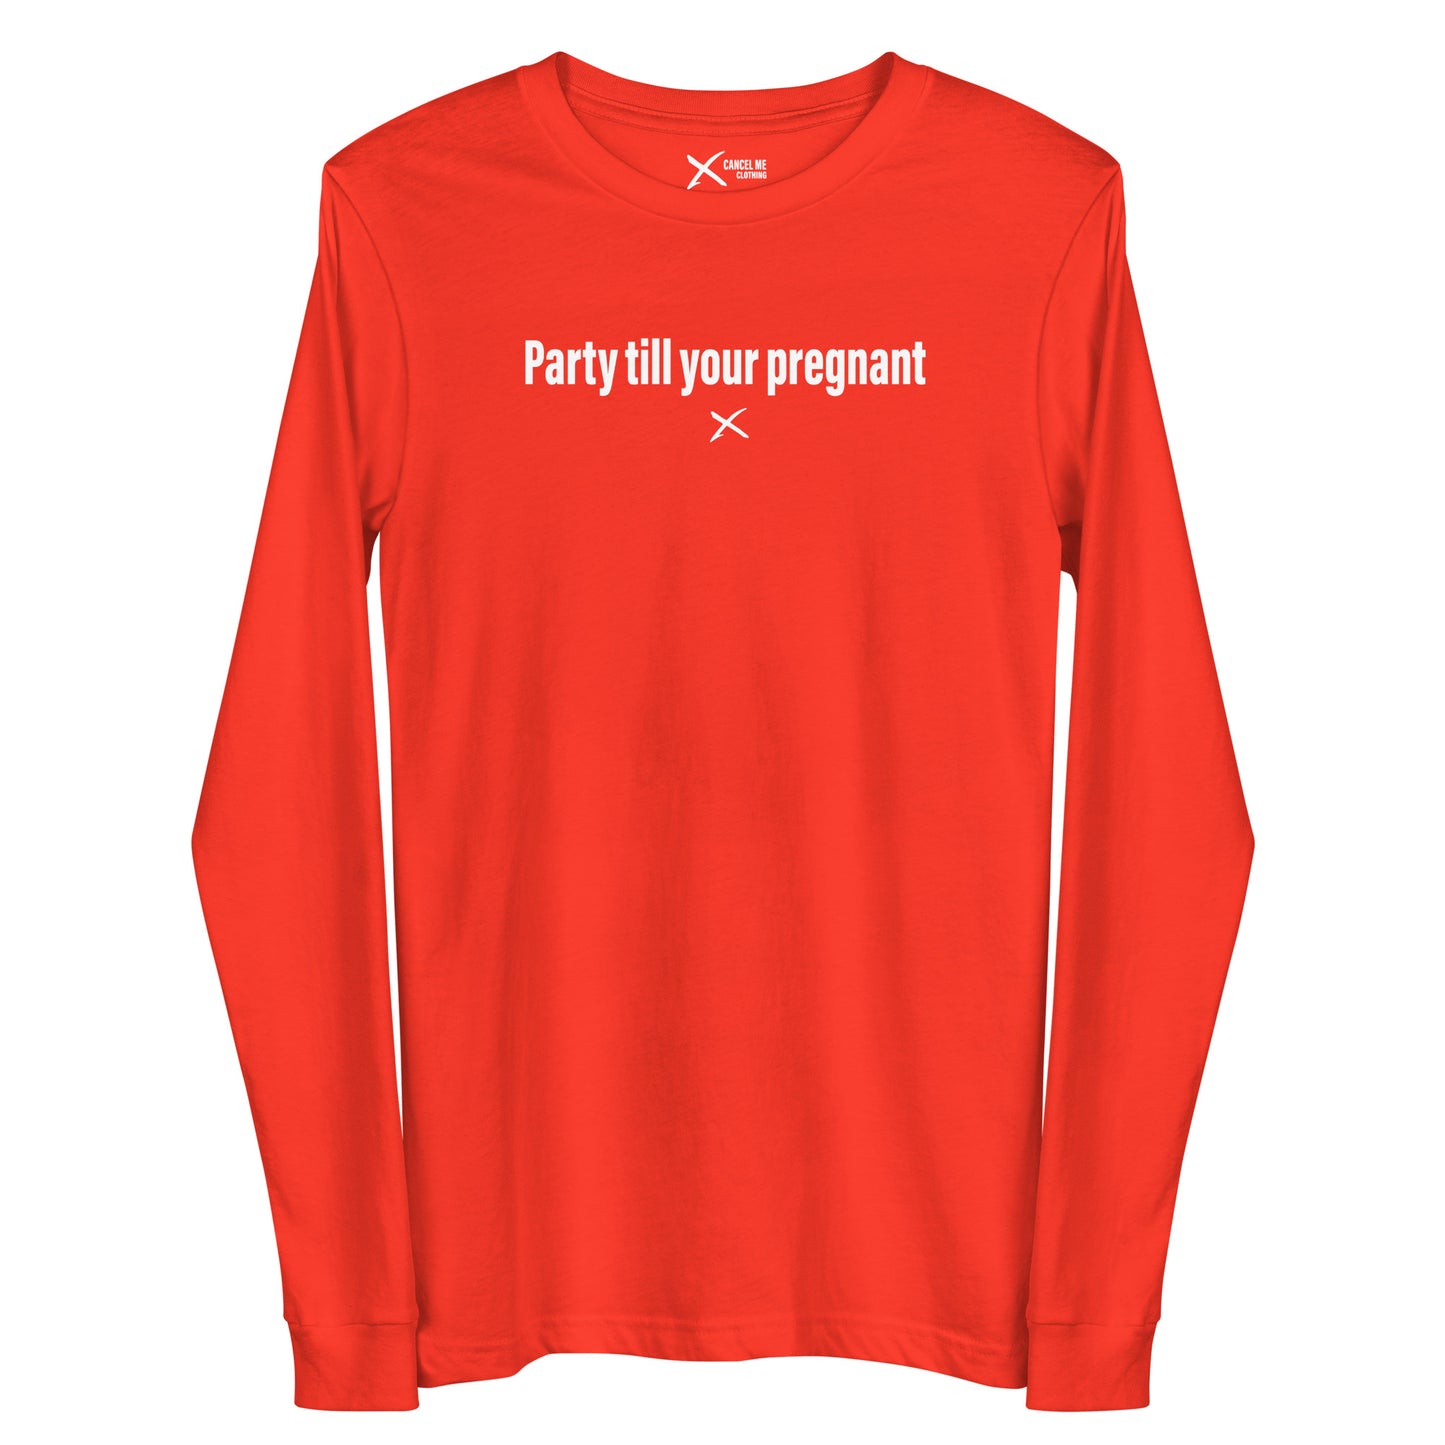 Party till your pregnant - Longsleeve